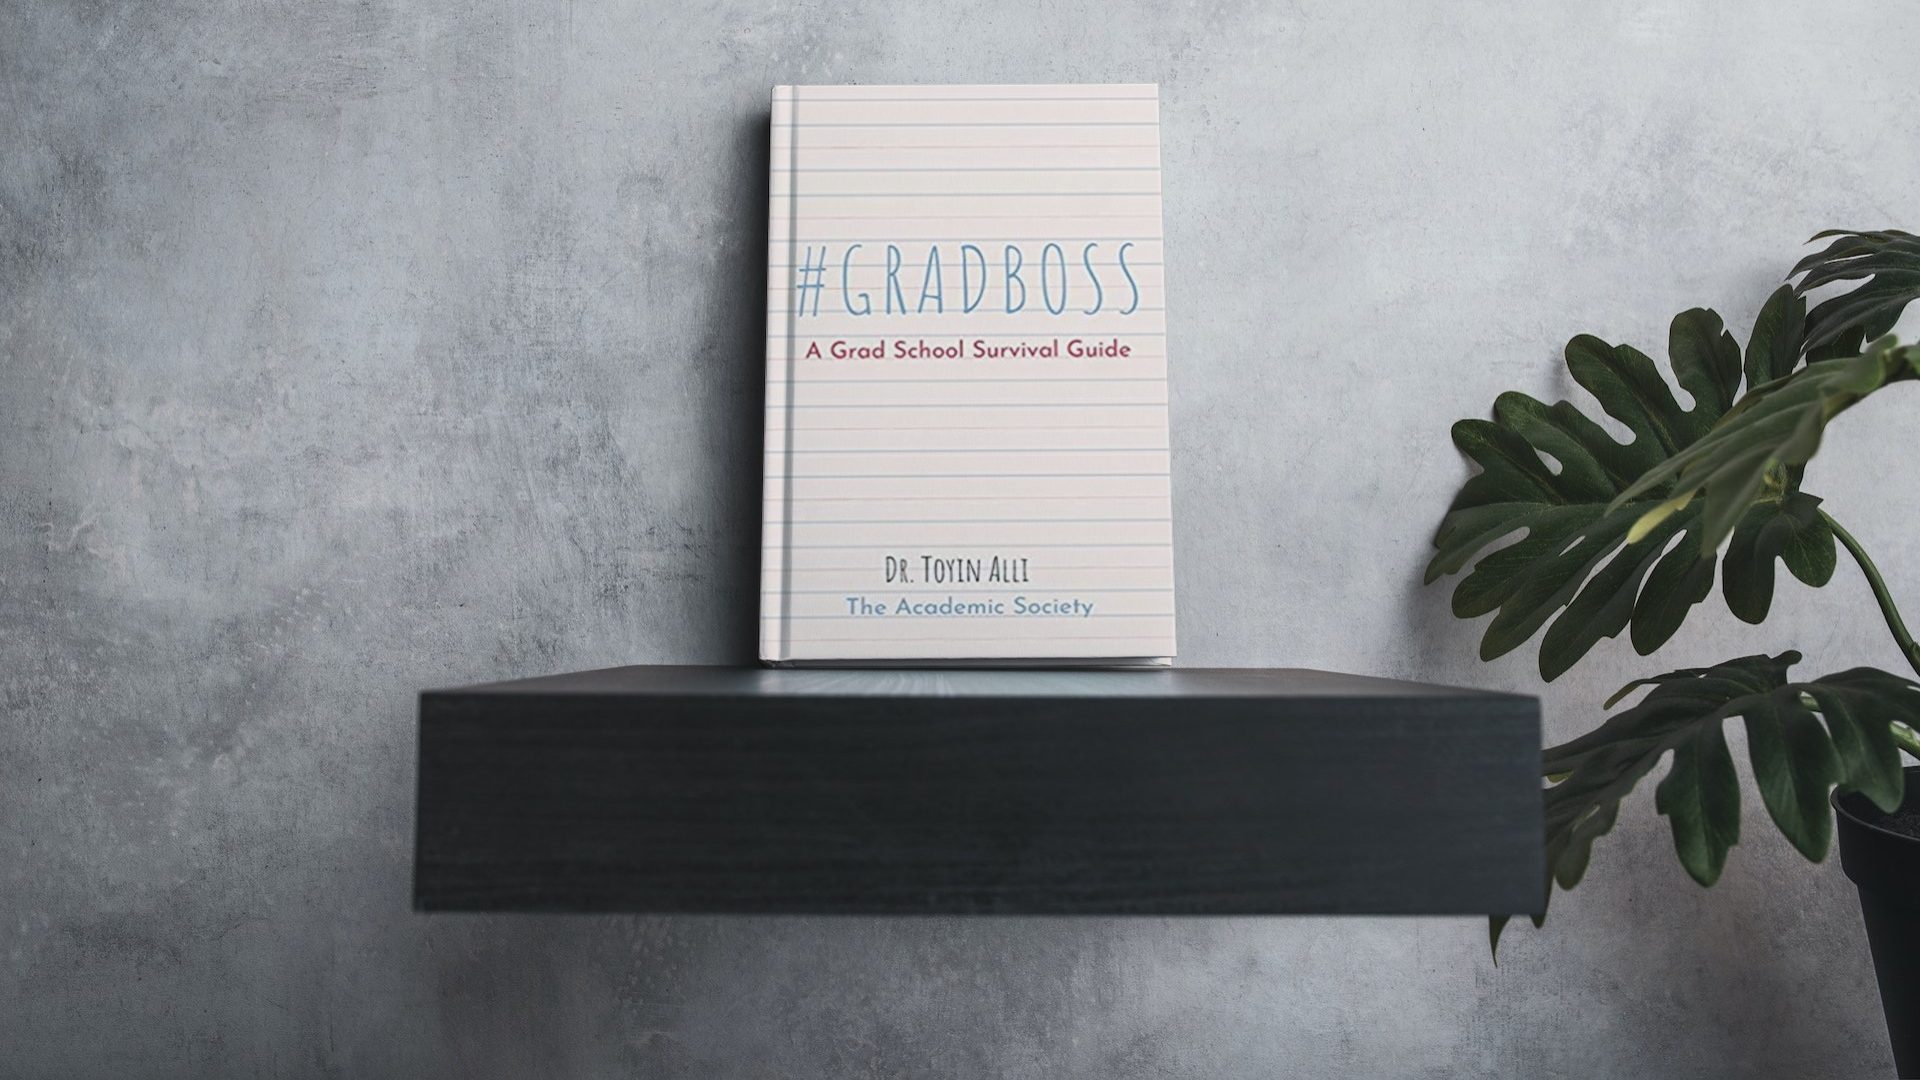 A copy of #GradBoss A Grad School Survival Guide by Dr. Toyin Alli of The Academic Society sits on a black floating shelf next to a potted fern.